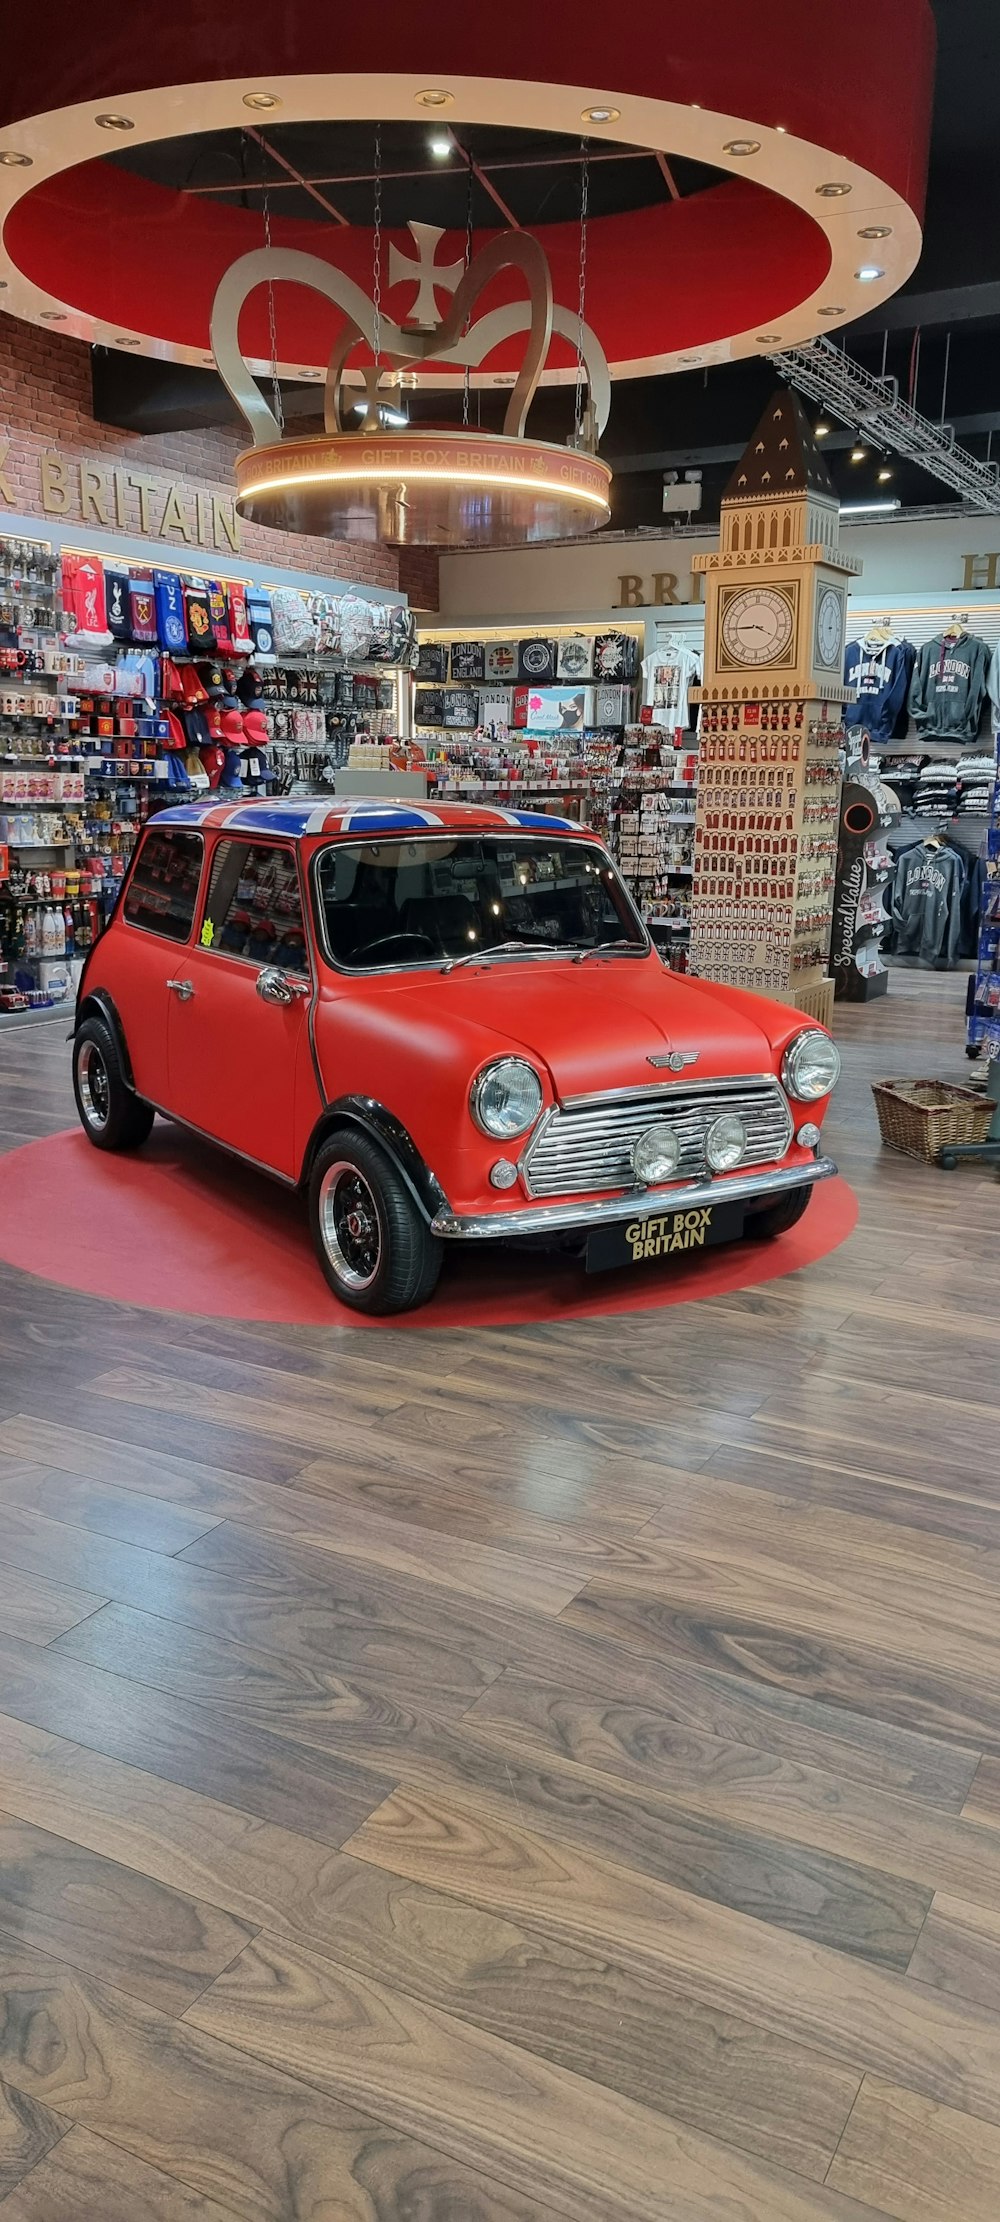 a small red car is on display in a store